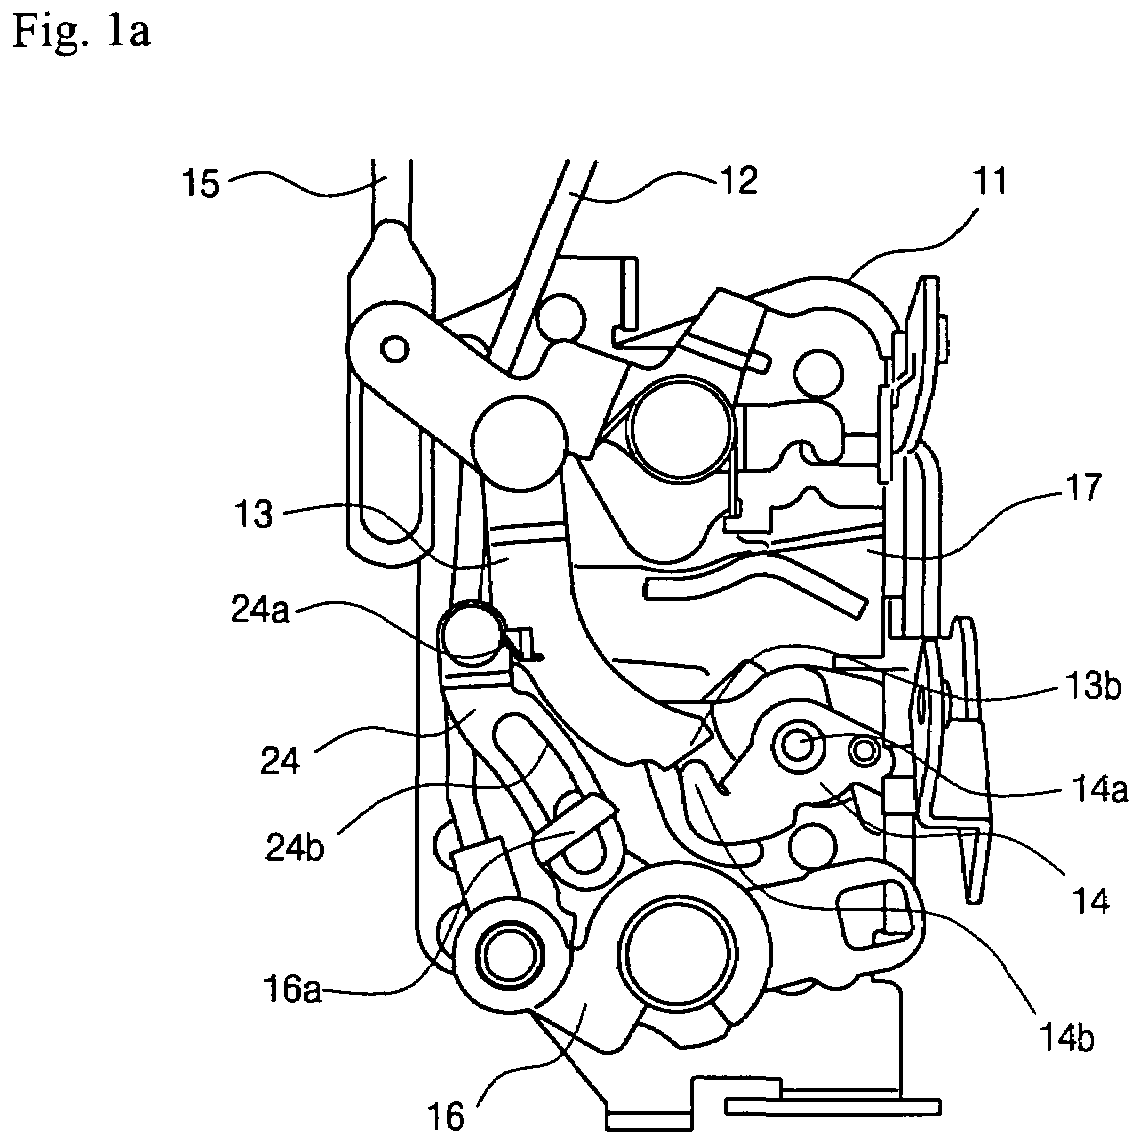 Jam-resistant door latch assembly for vehicles